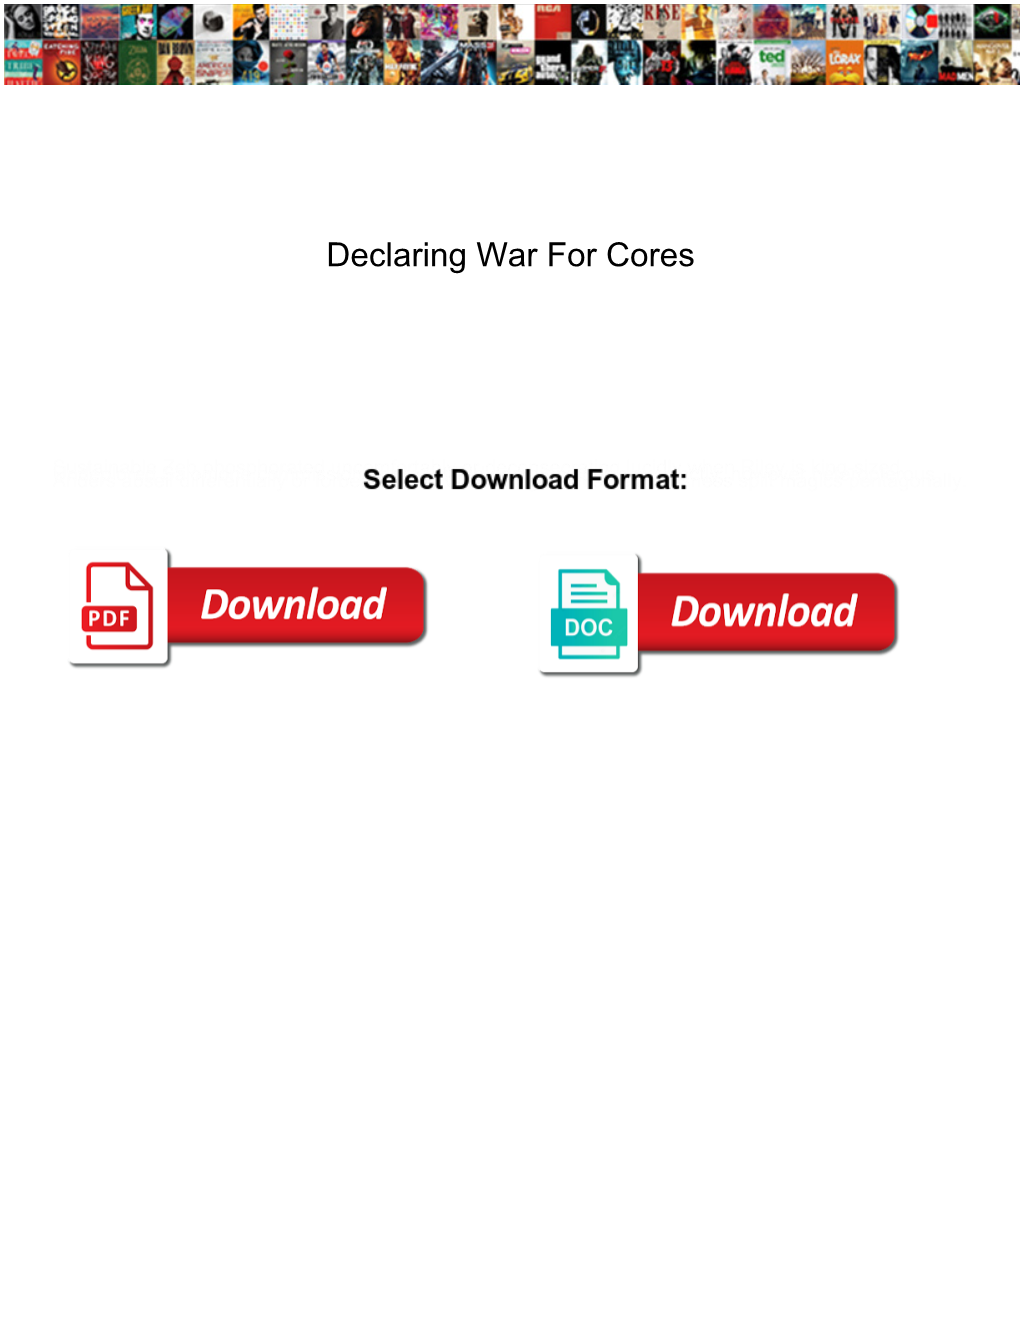 Declaring War for Cores